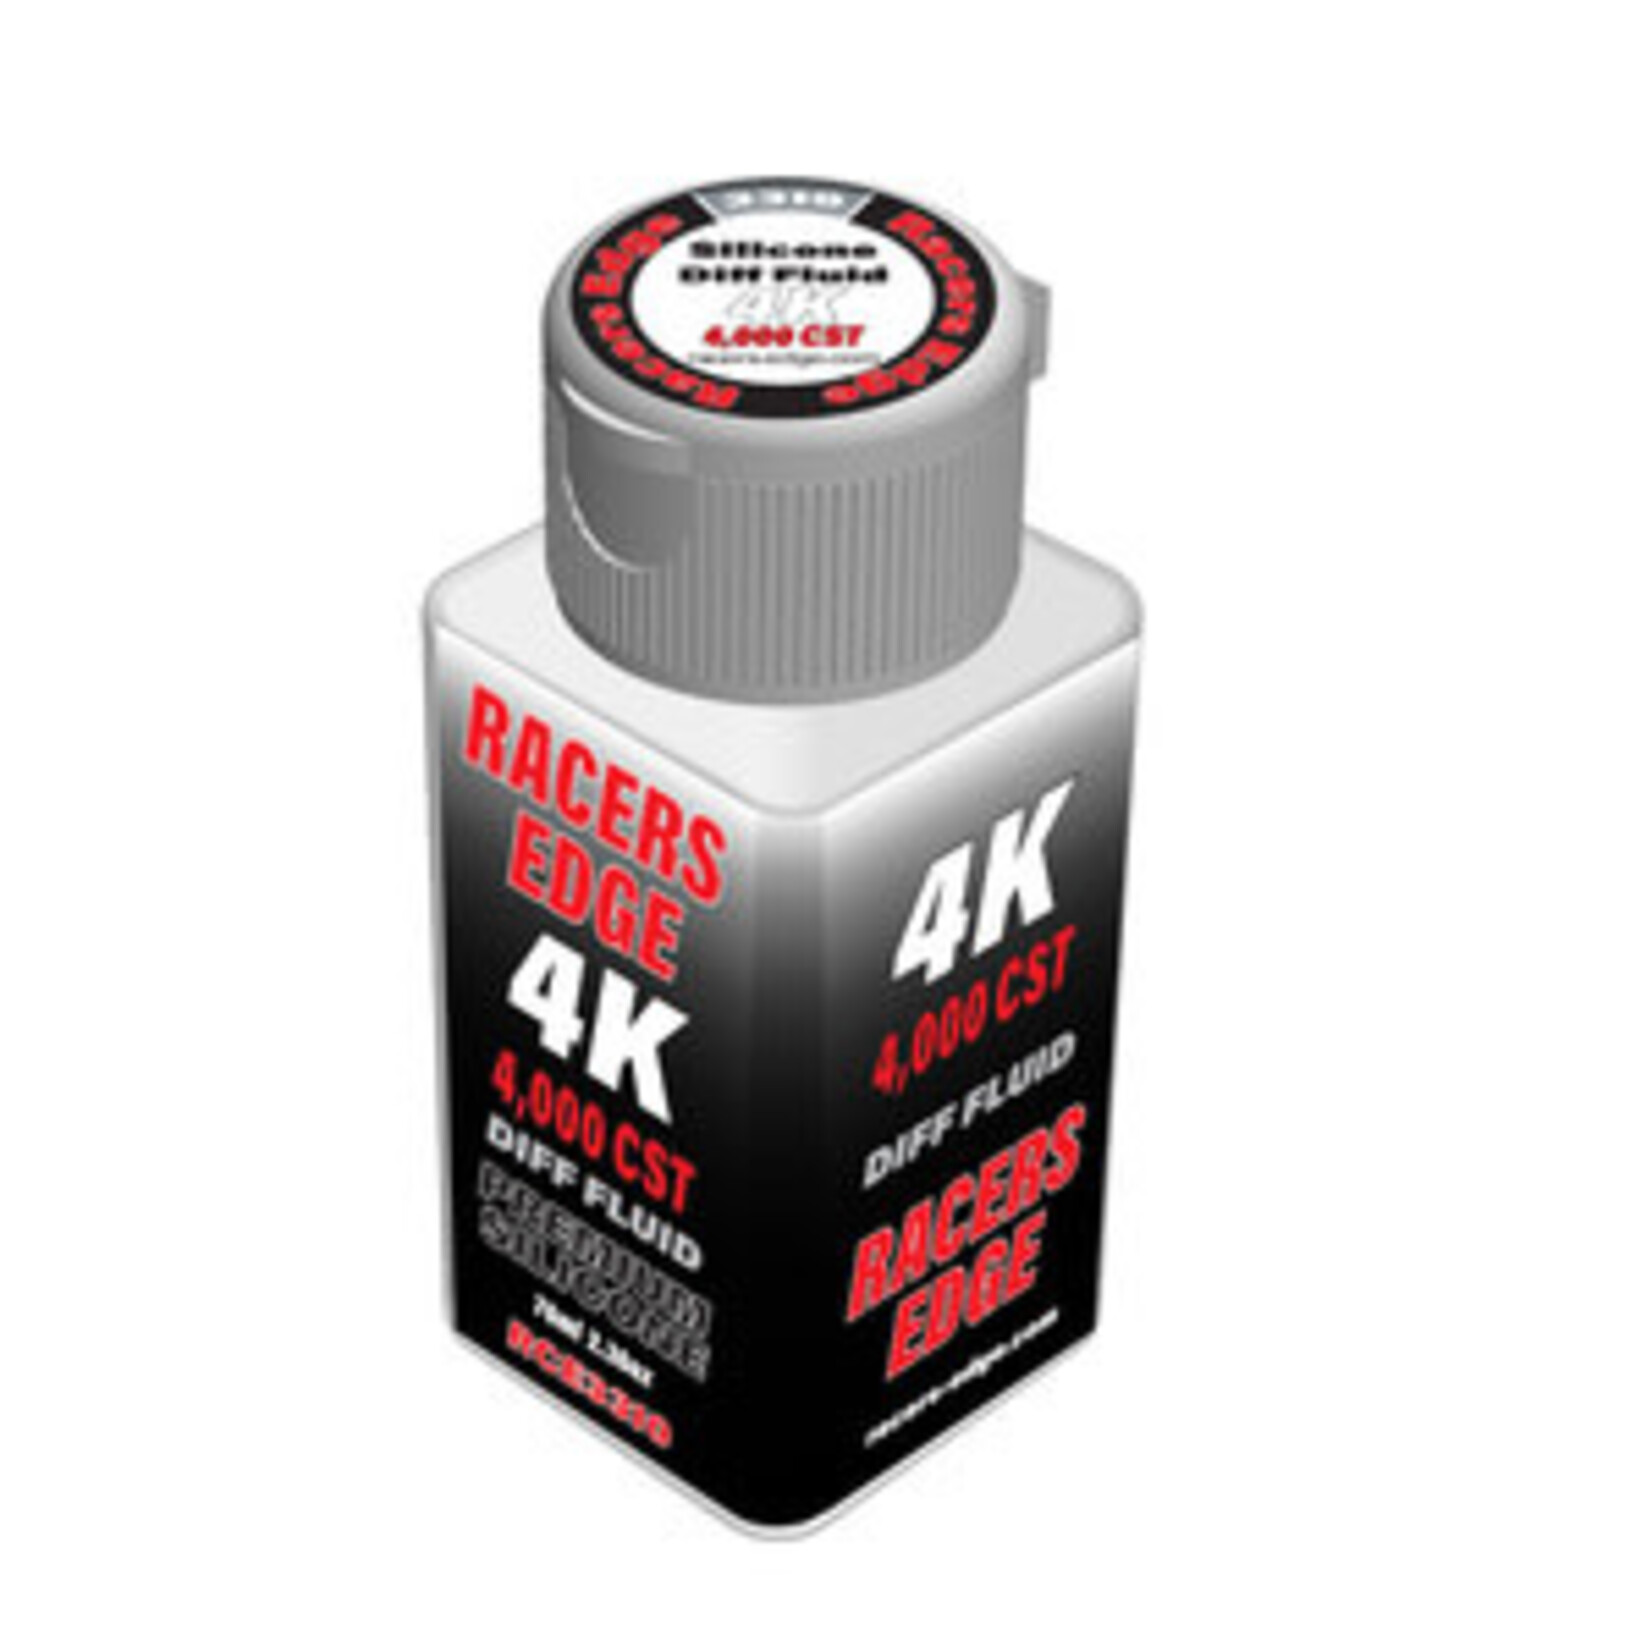 RACERS EDGE 4,000cSt 70ml 2.36oz Pure Silicone Diff Fluid